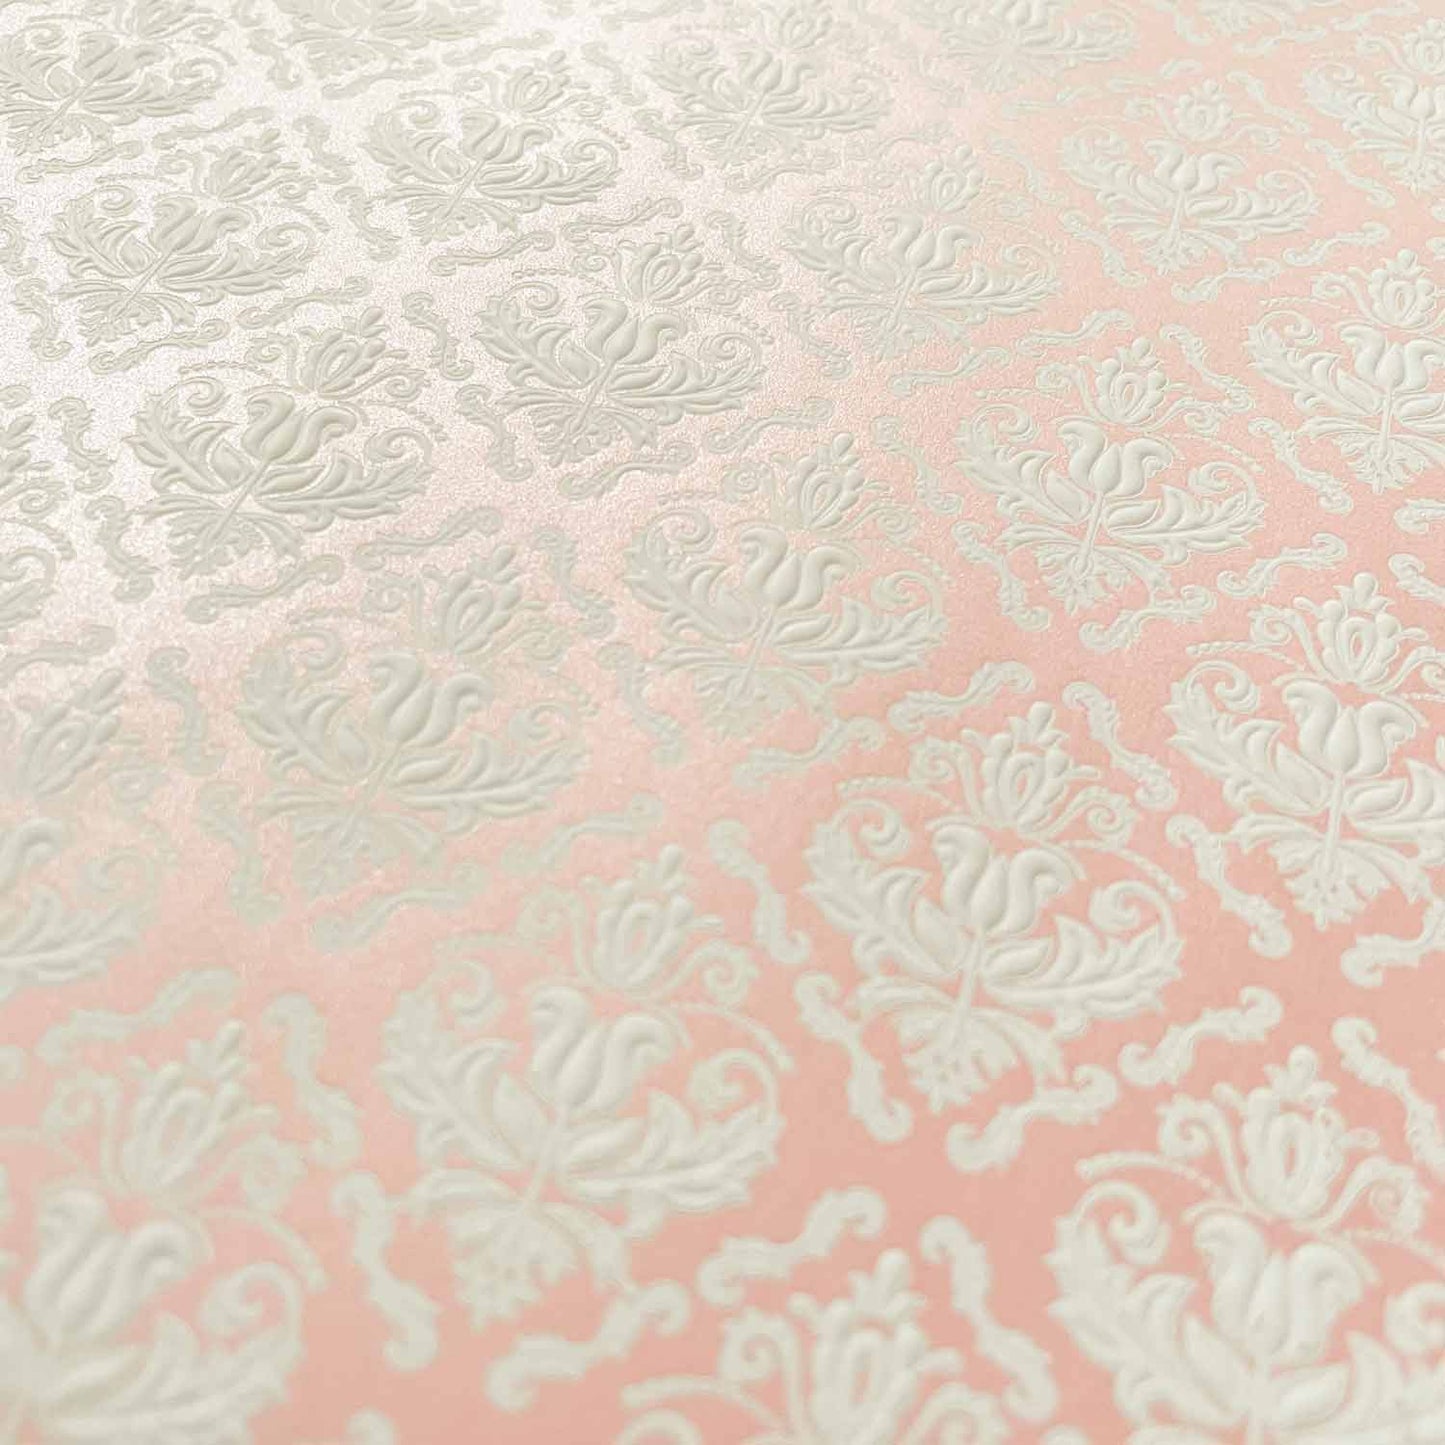 pink-and-white-embossed-vintage-pattern-paper